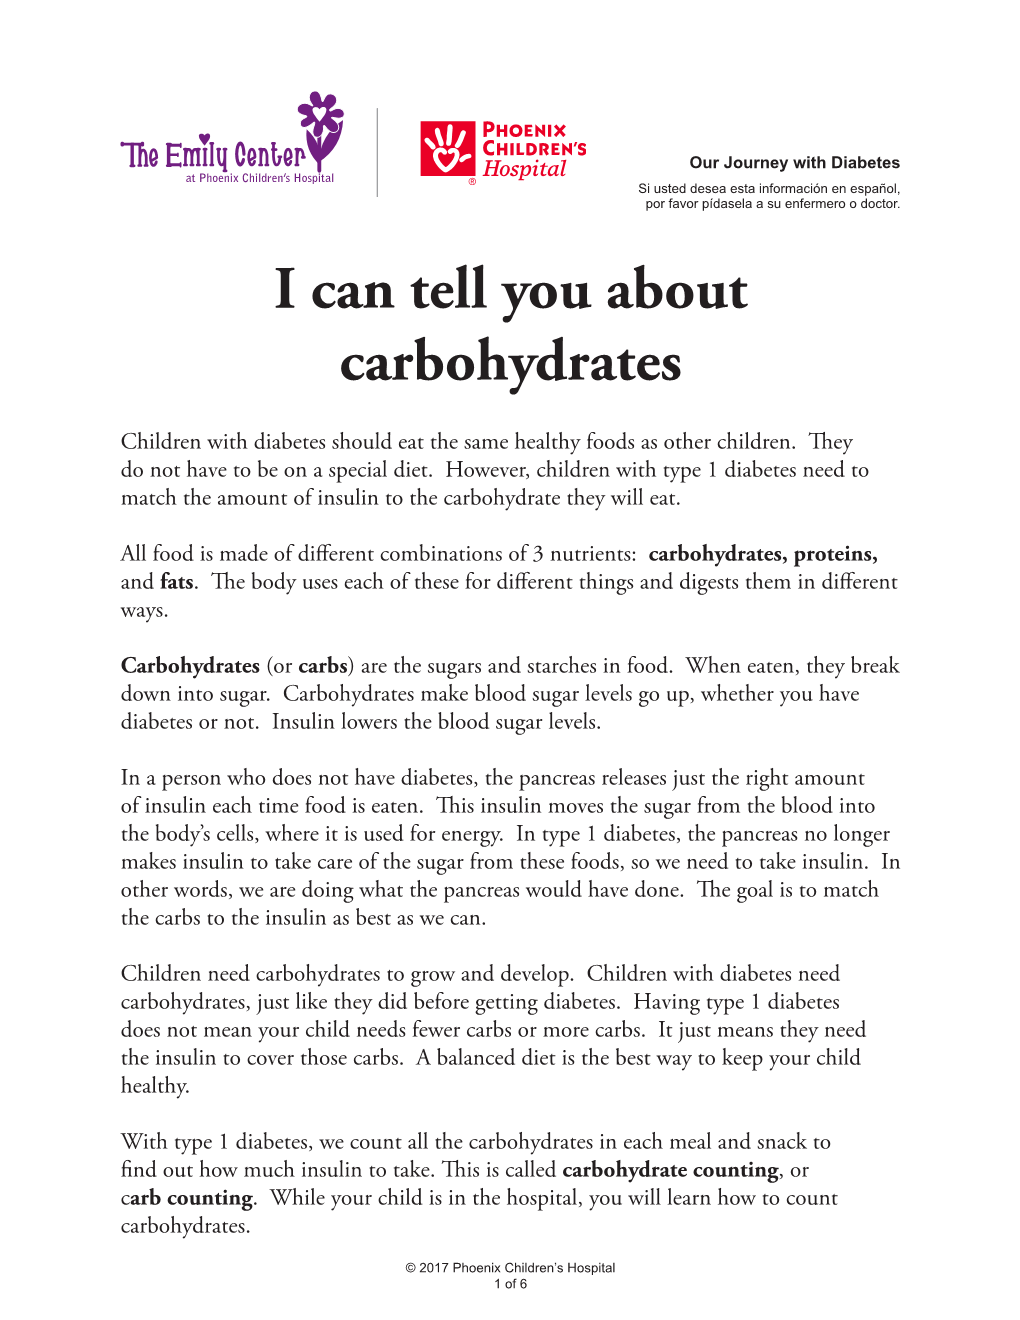 I Can Tell You About Carbohydrates